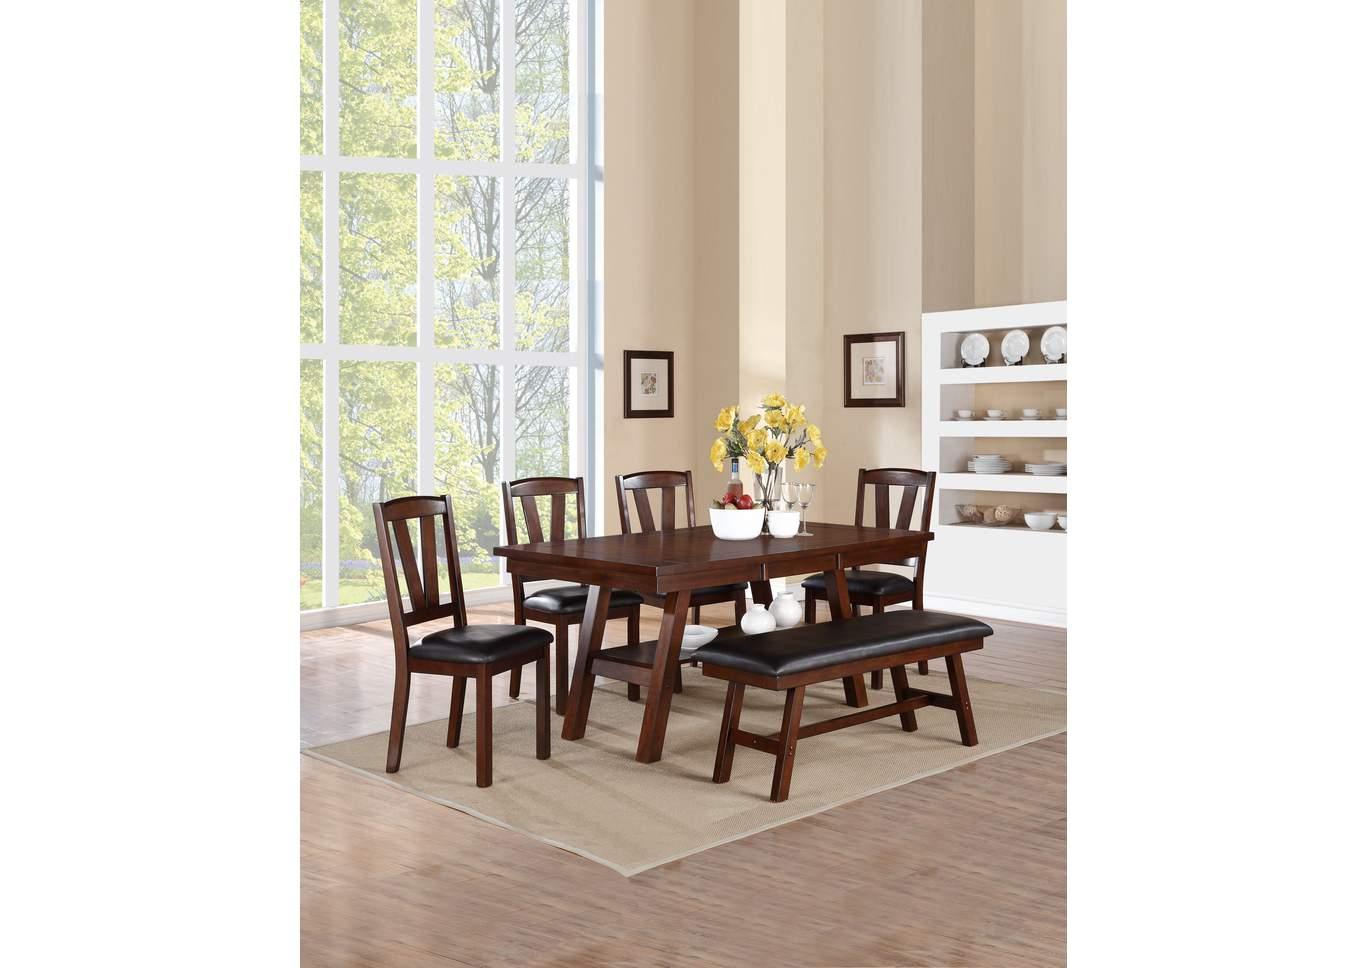 F2271 Table + 4 F1331 Side Chairs + F1332 Dining Bench,Poundex_Instore